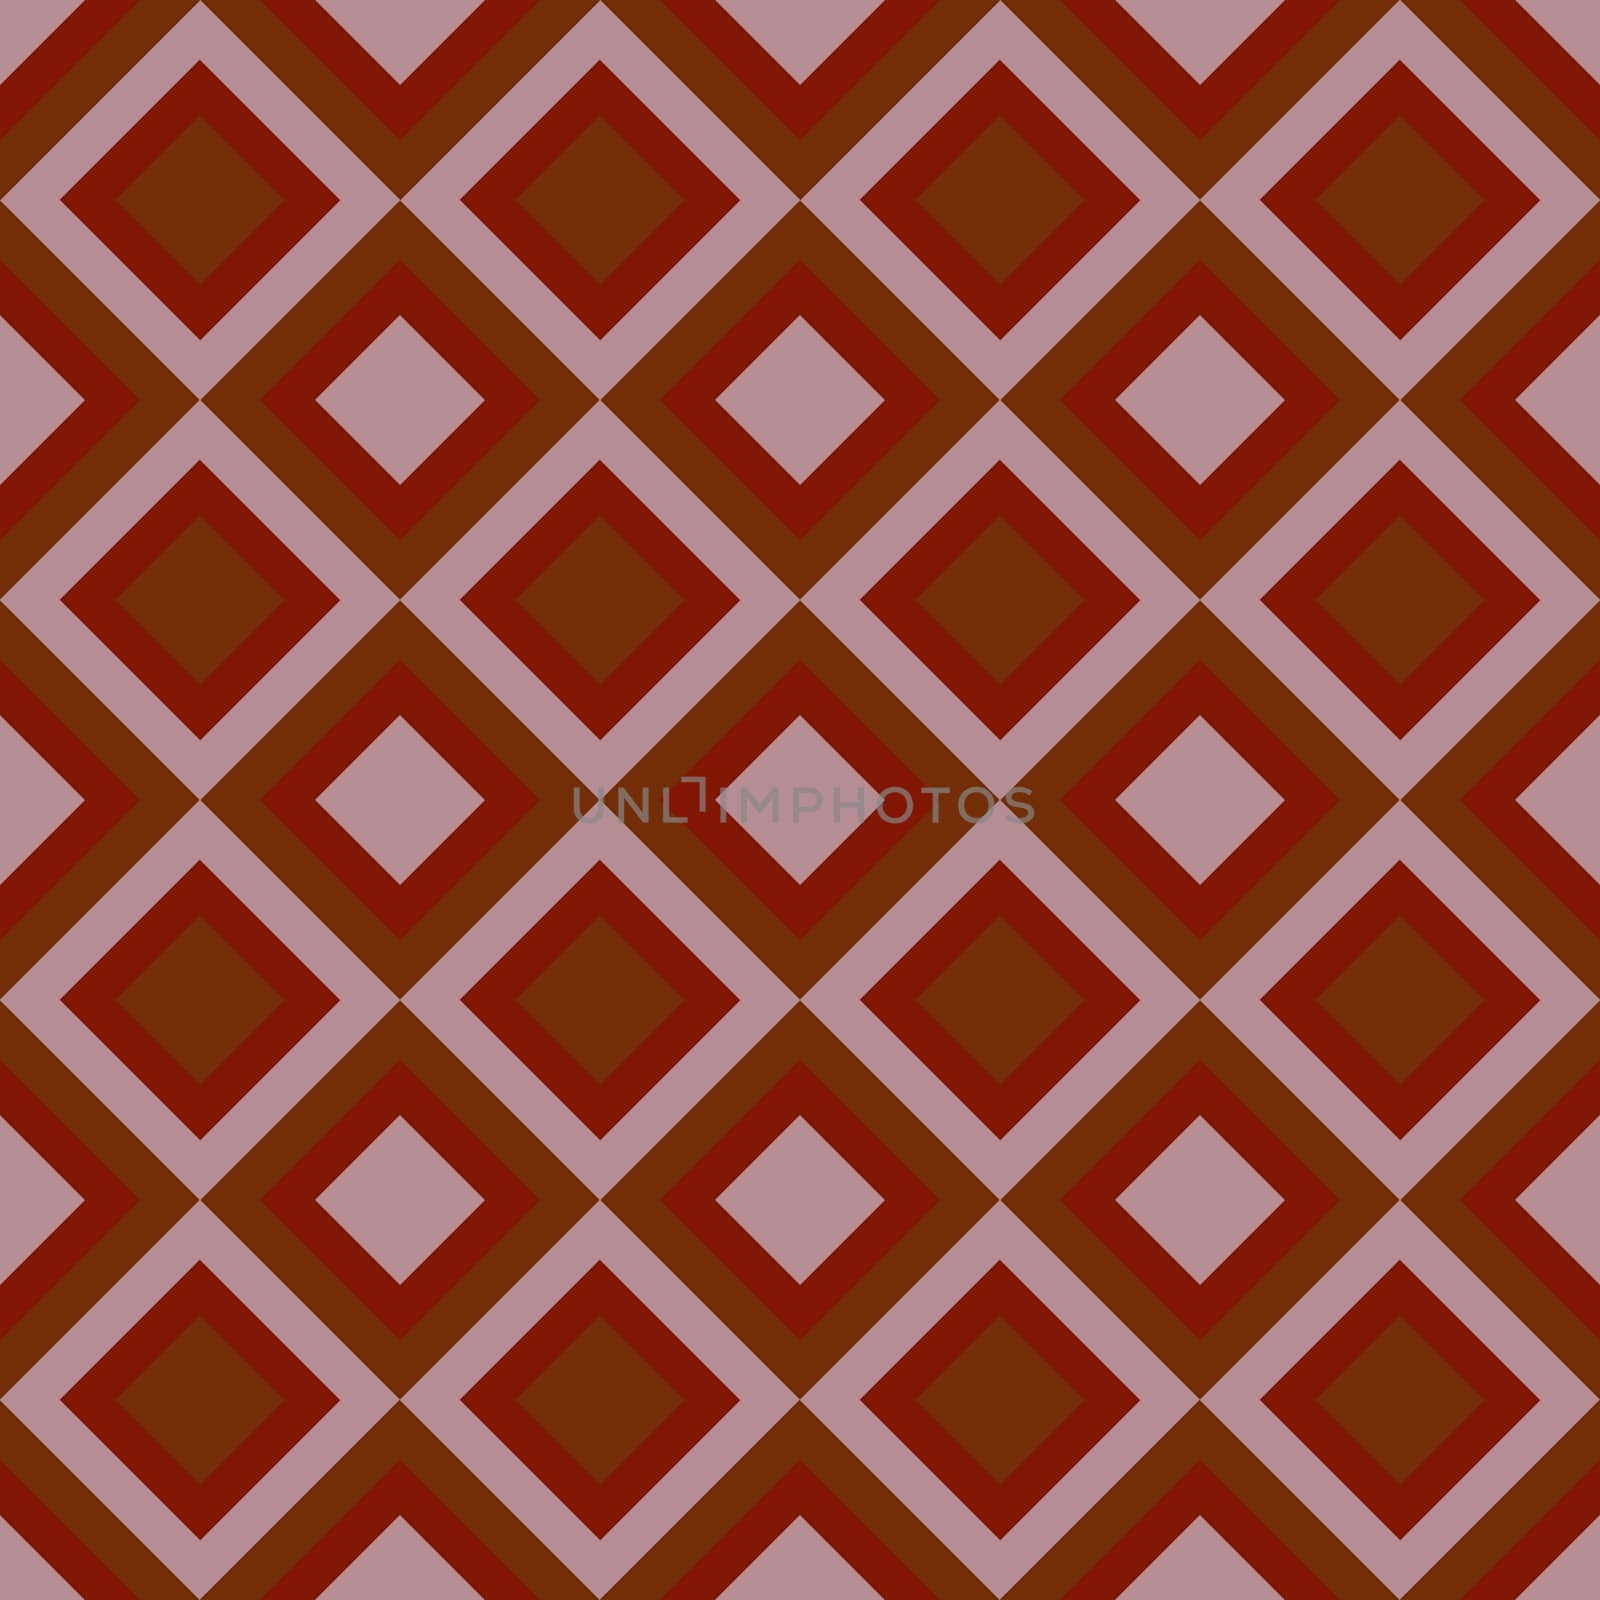 Vintage aesthetic pattern with triangles in the style of the 70s and 60 by Dustick